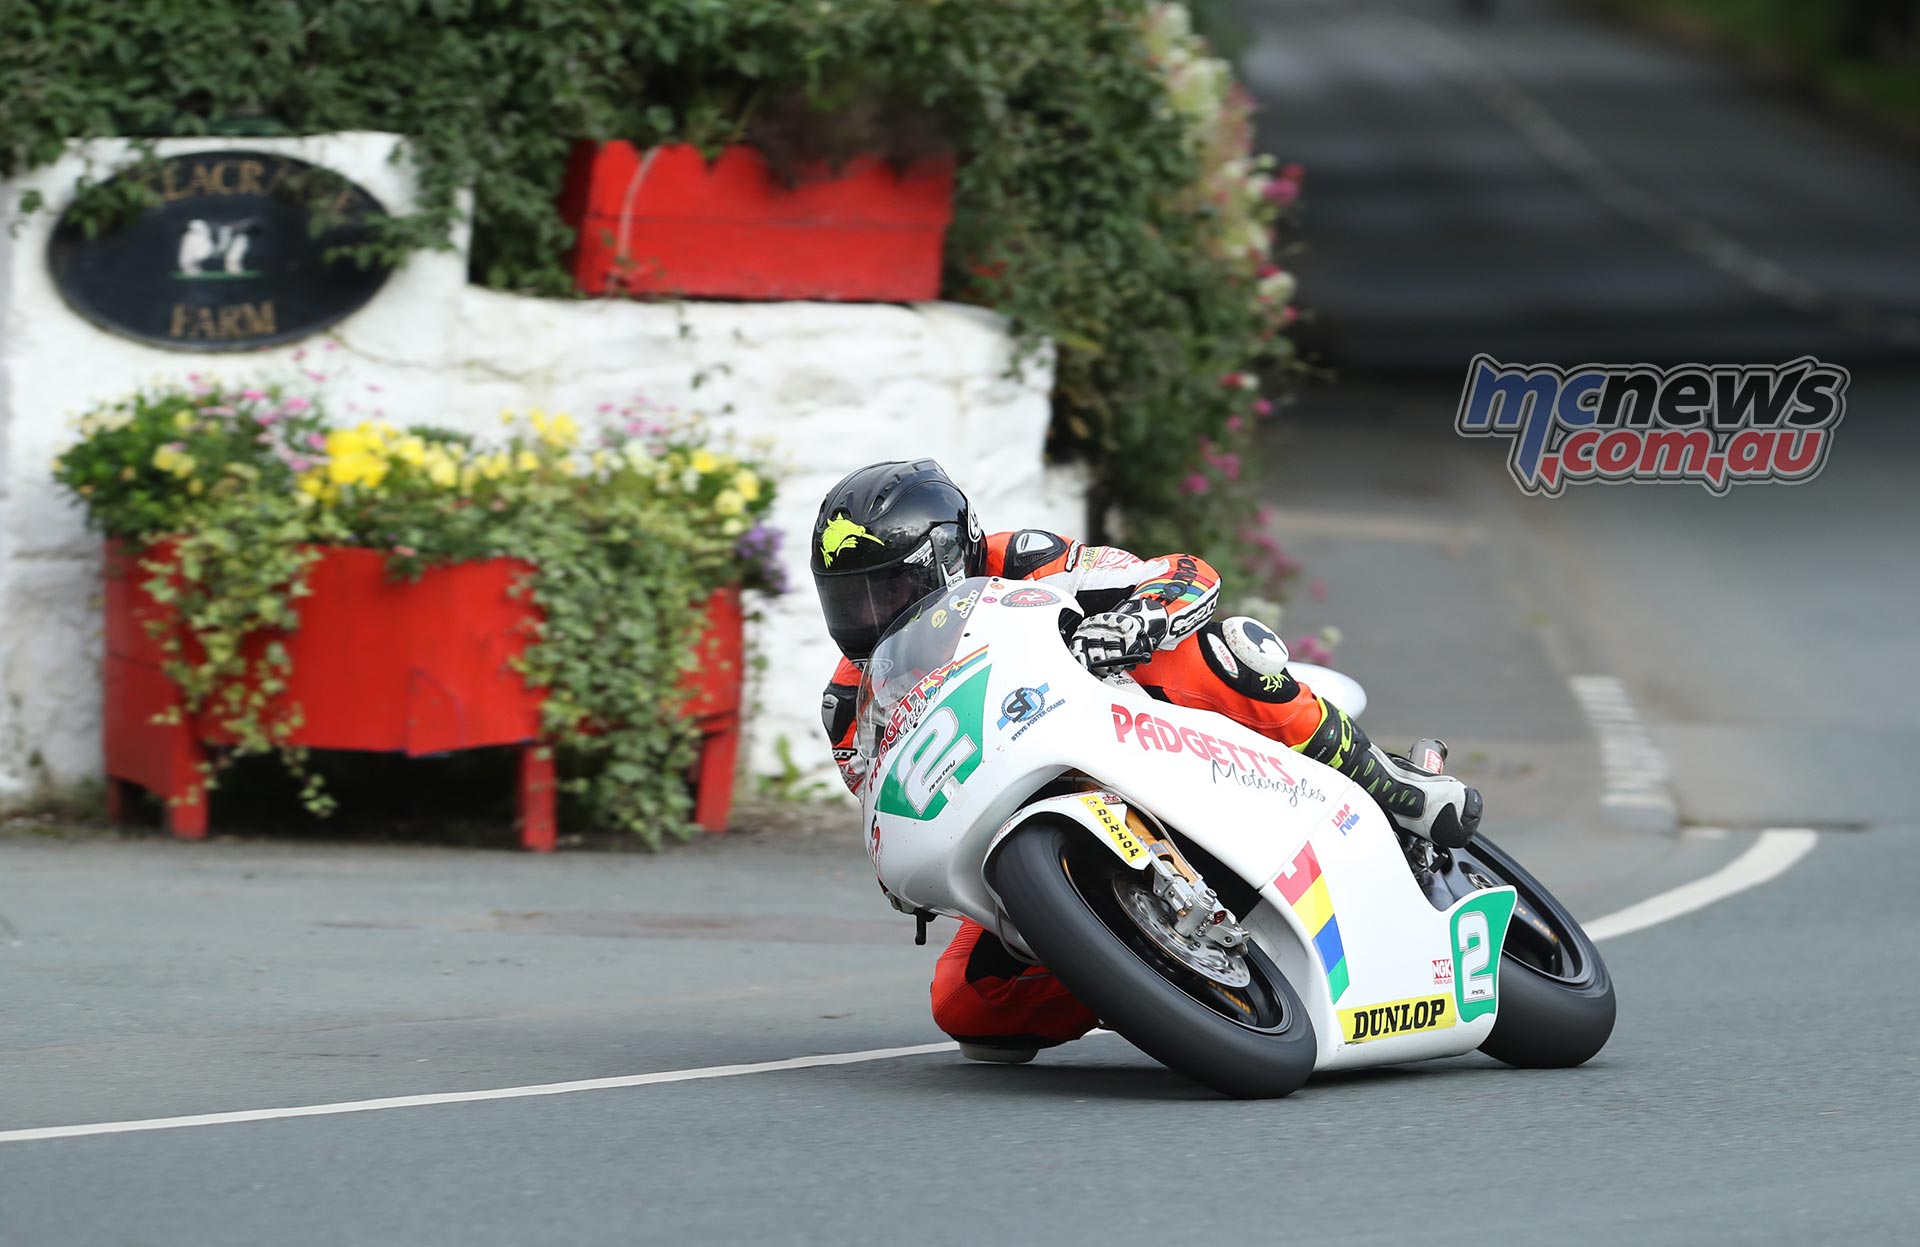 Bruce Anstey (250 Honda/Padgetts Motorcycles.com) at Ballacraine during qualifying for the Bennett's Classic TT.